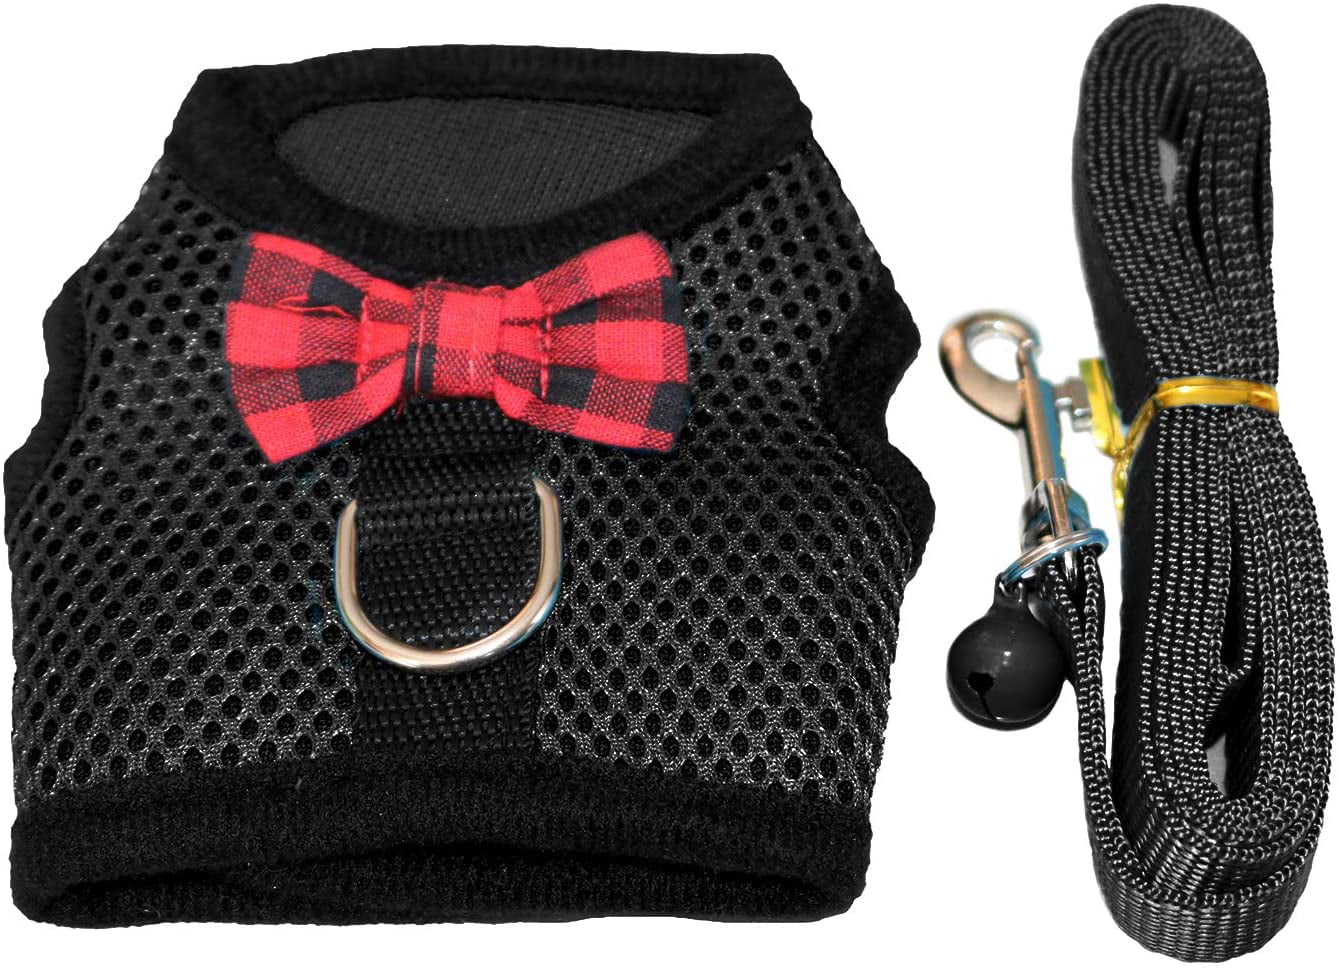 No Pull Comfort Padded Vest for Small Pet RYPET Small Animal Harness and Leash Soft Mesh Small Pet Harness with Safe Bell 